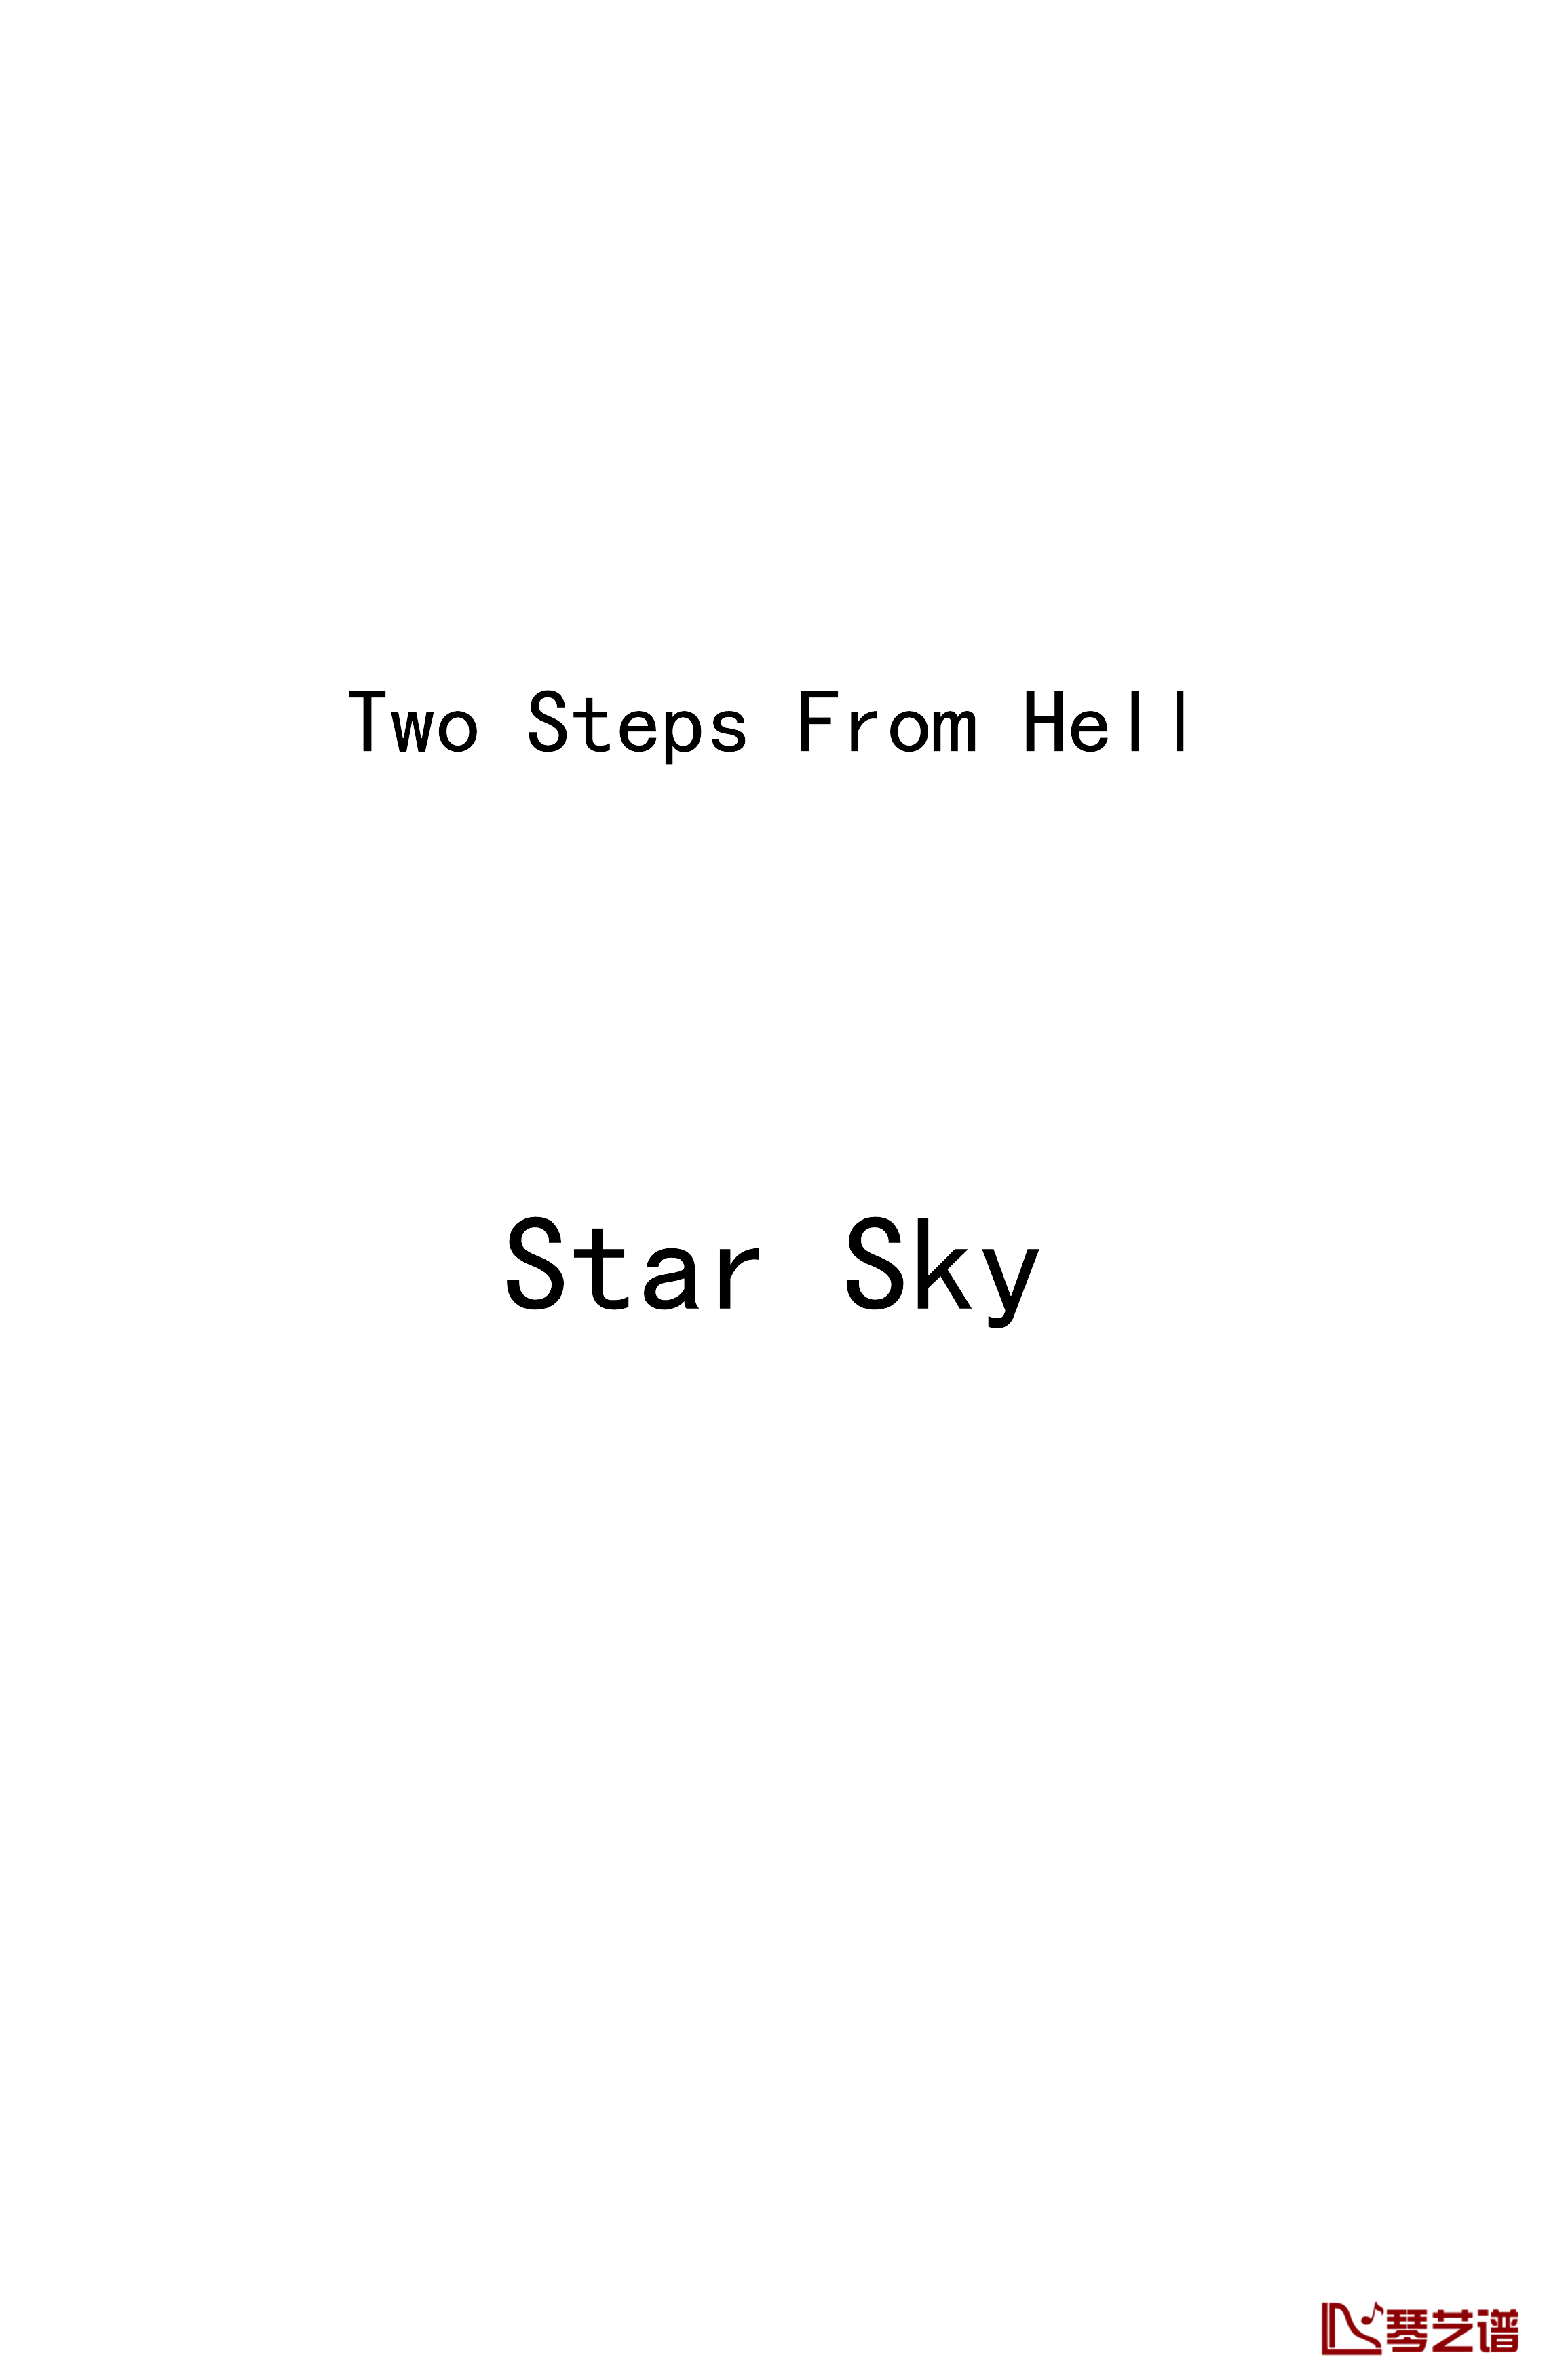 Star Sky钢琴谱-Two Steps From Hell1